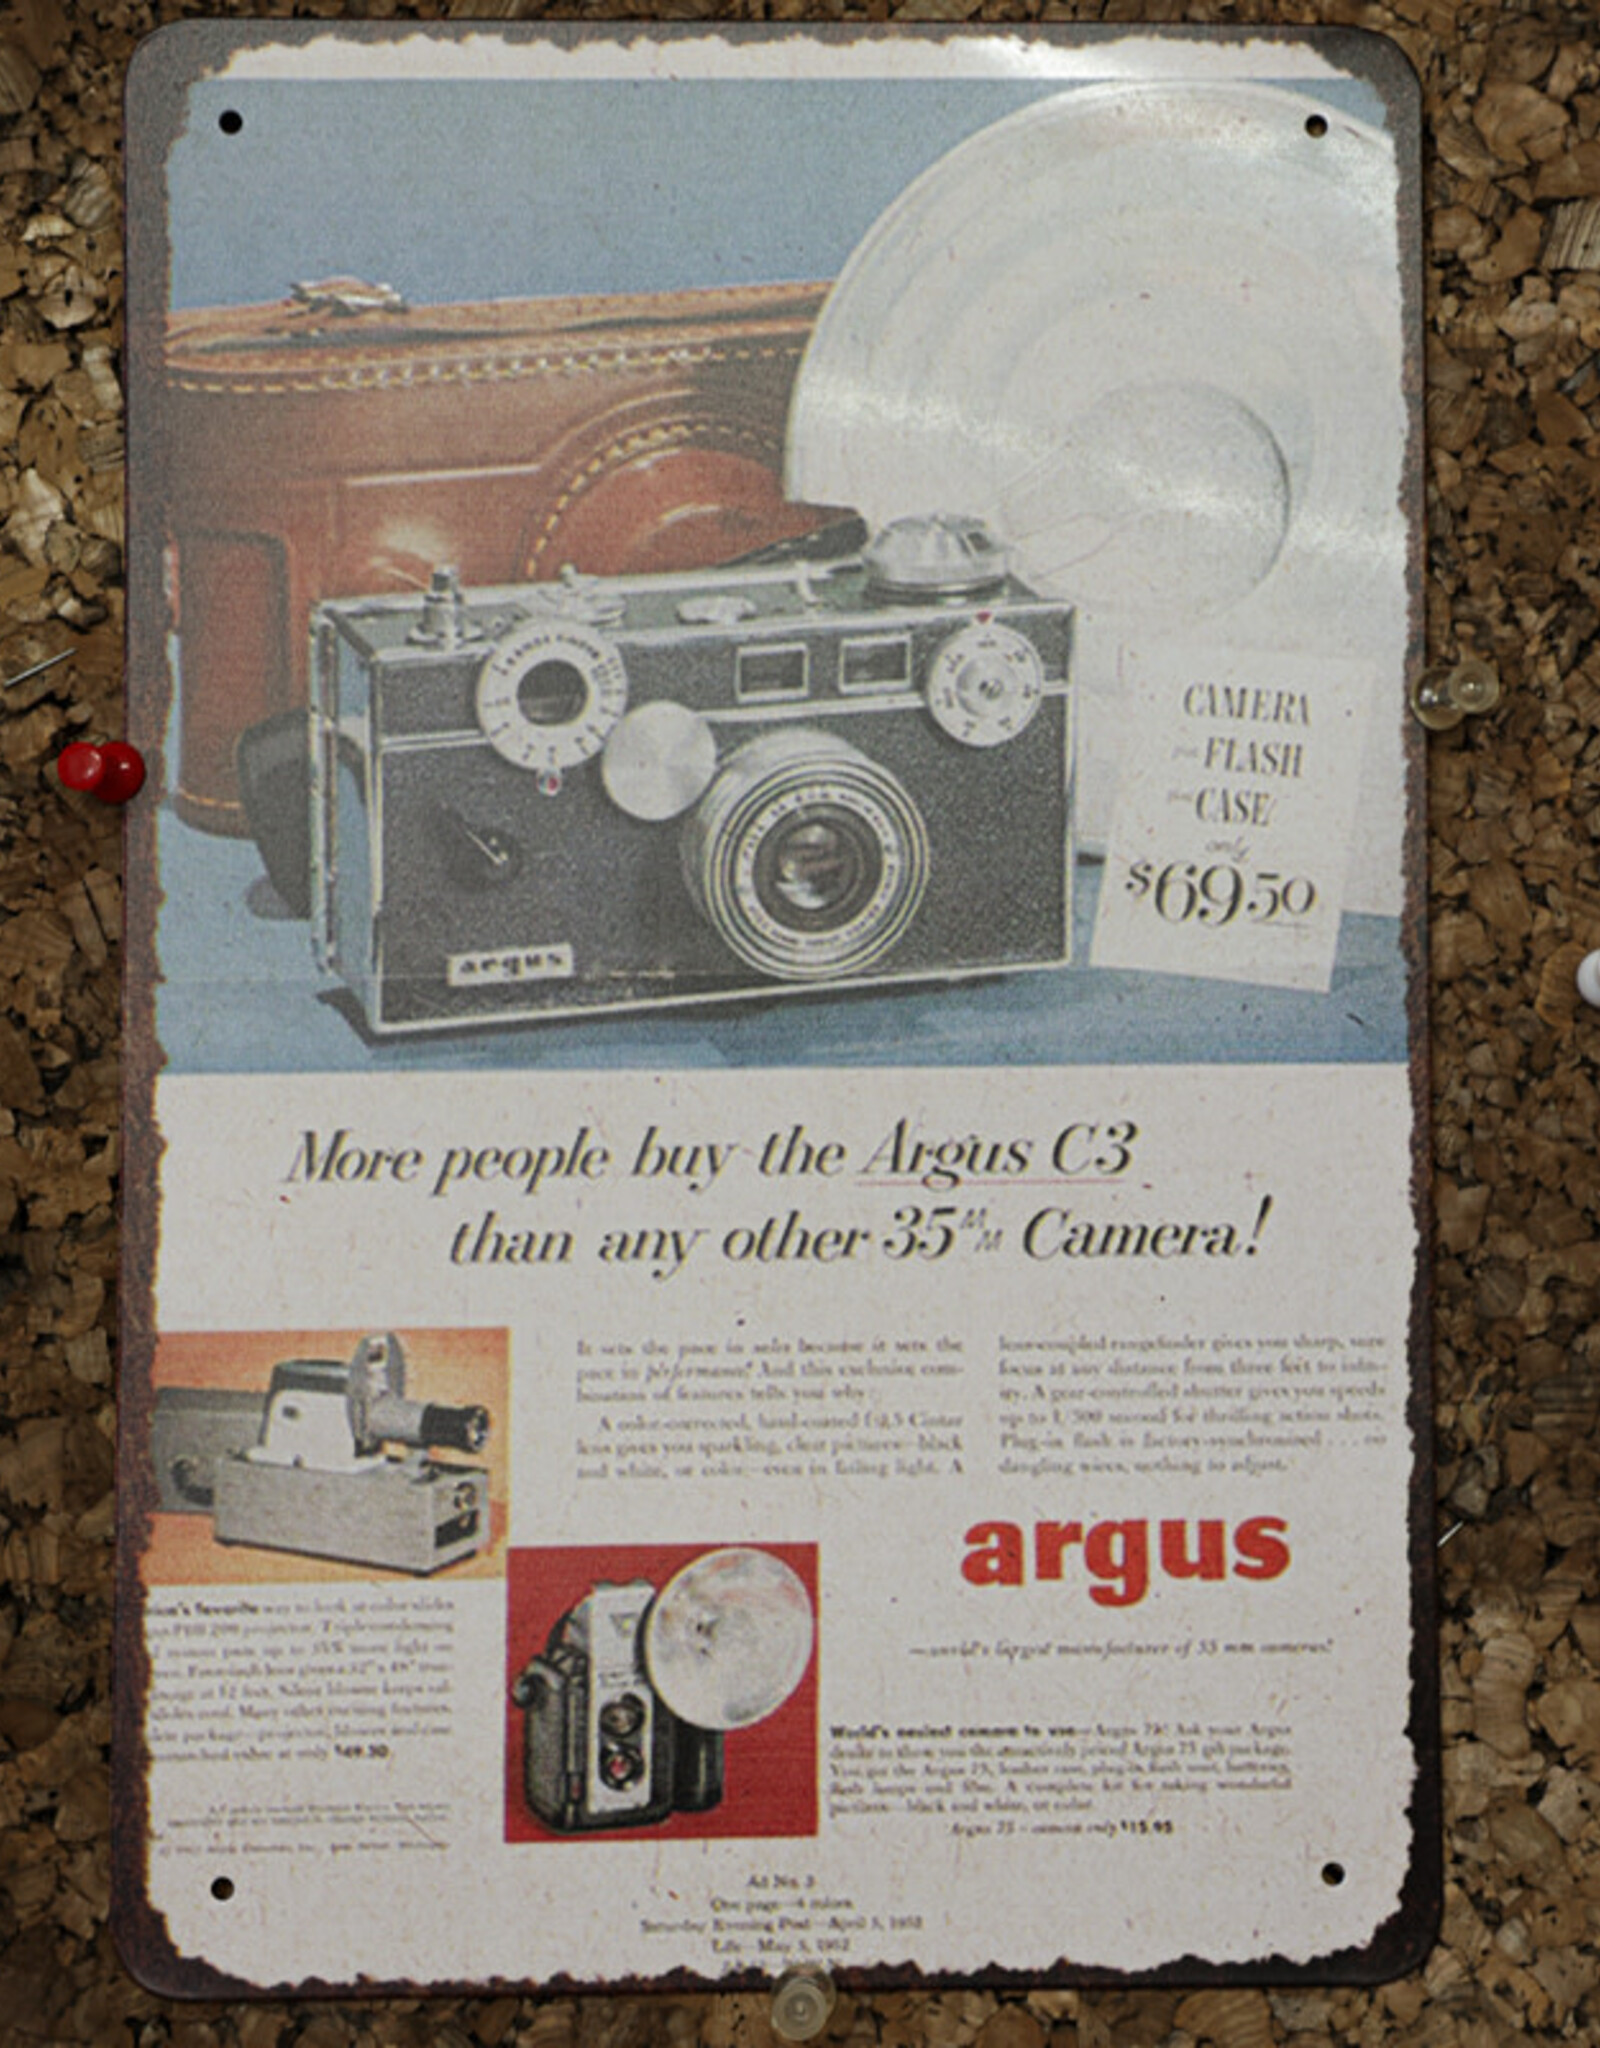 Camera and Film Metal Plate Sign for Decor (Argus)